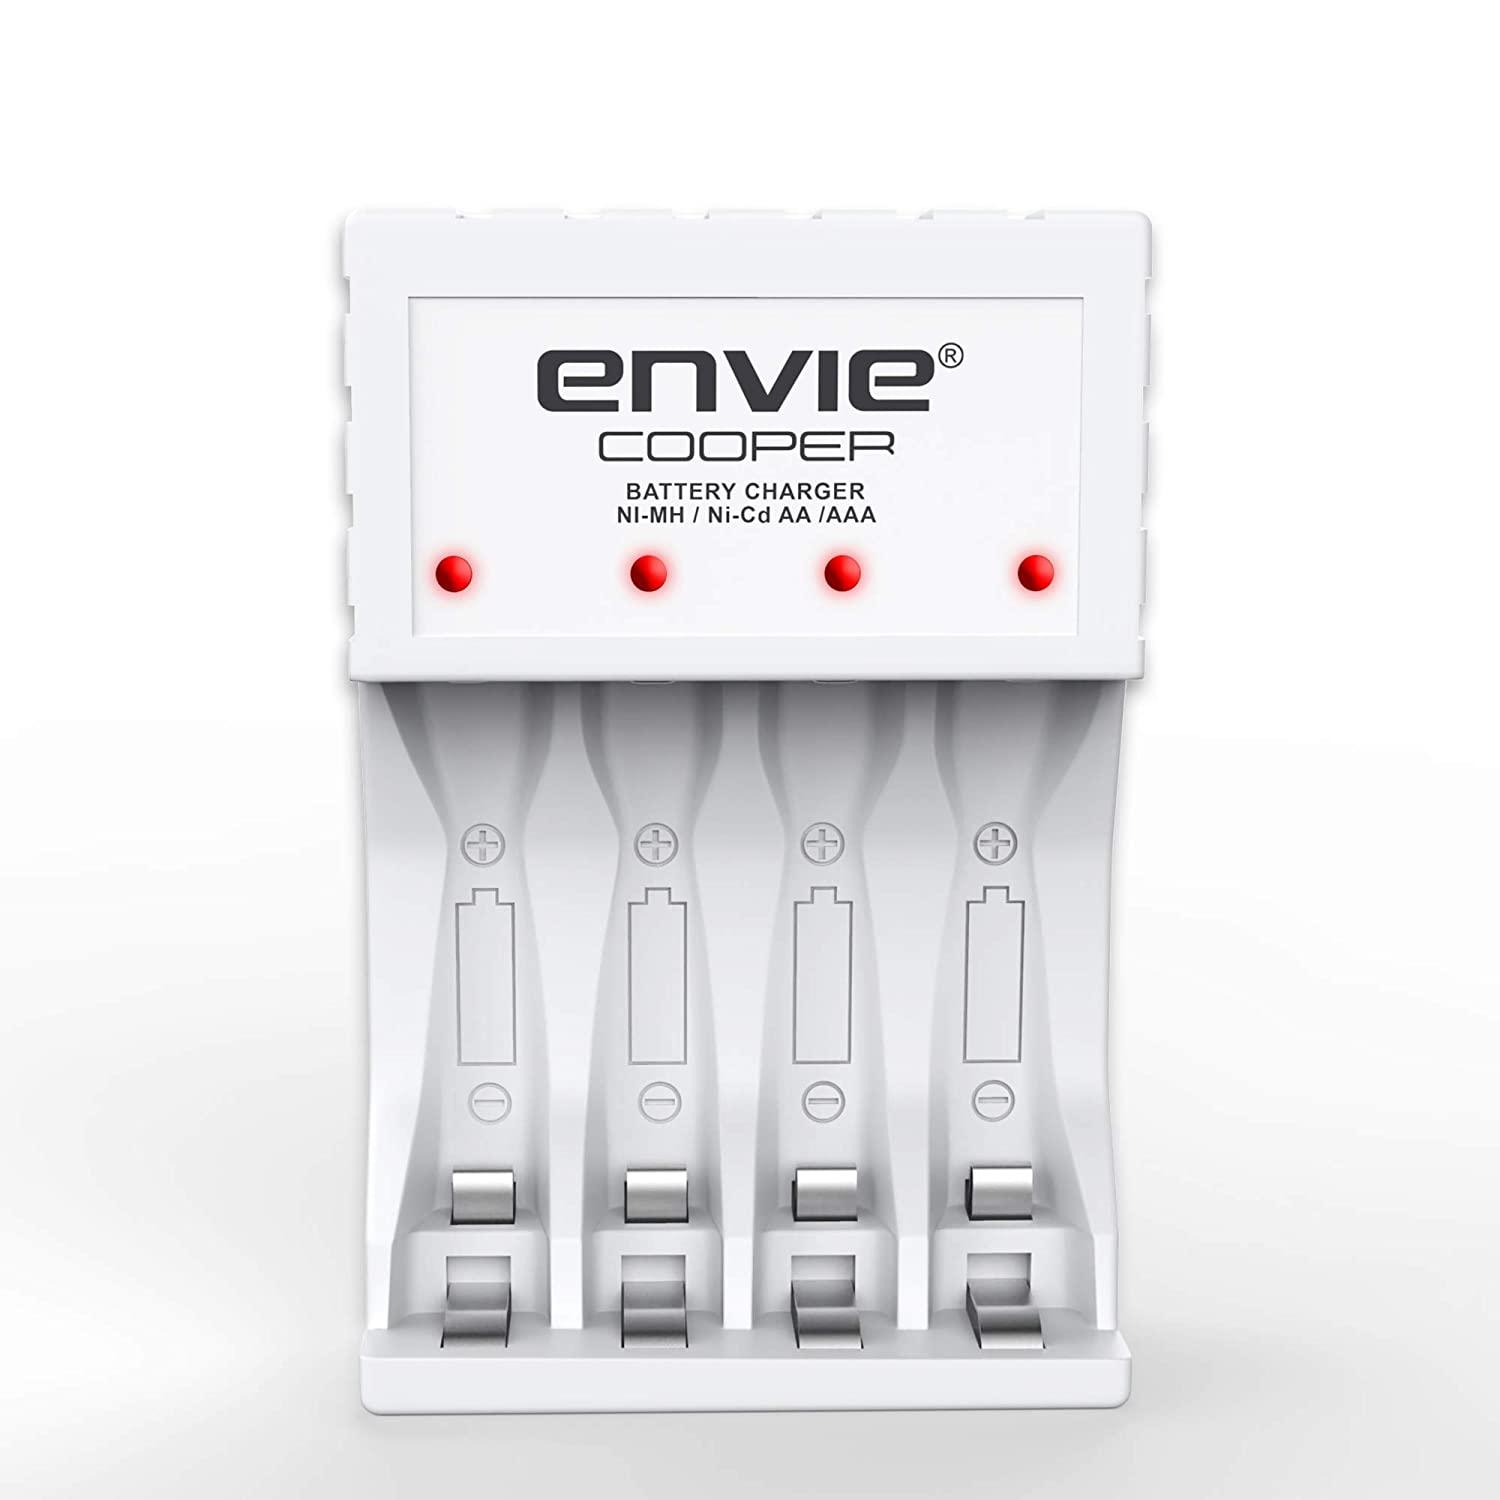 ENVIE (ECR-20 MC) Cooper Rechargeable Battery Charger for AA & AAA Ni-mh Batteries with LED Indicator - Digitek